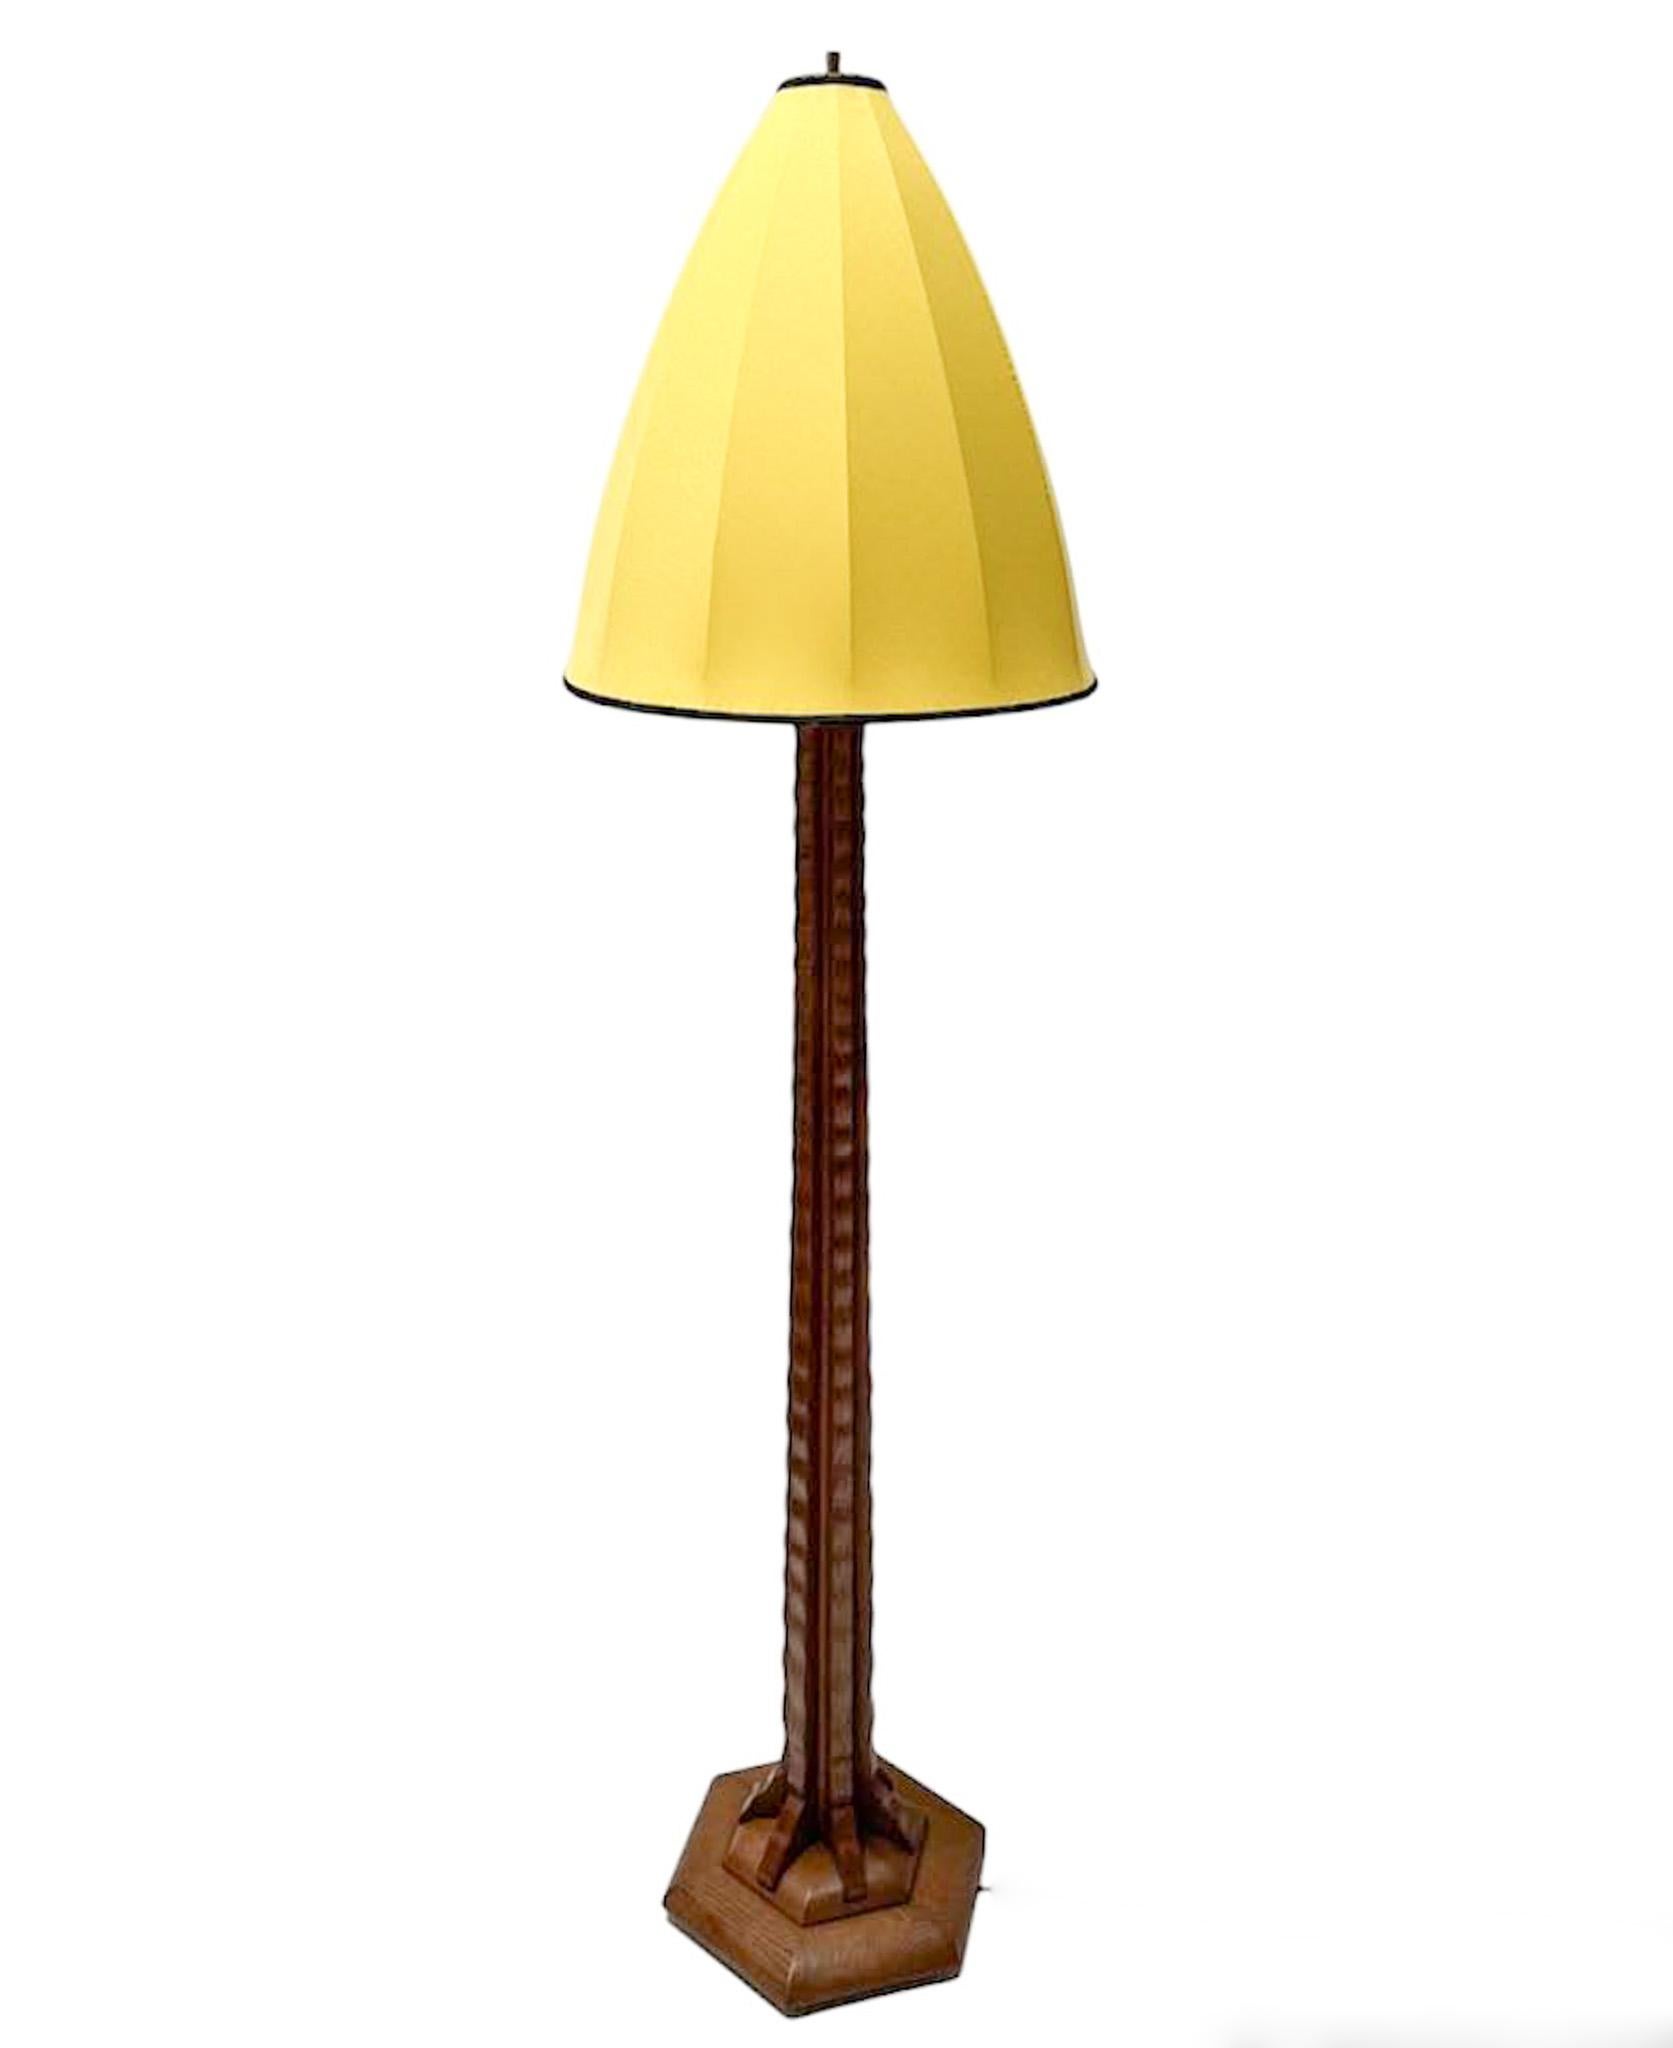 Magnificent and rare Art Deco Amsterdamse School floor lamp.
Striking Dutch design from the 1920s.
Solid oak base with the typical Amsterdamse School style elements.
The typical Amsterdamse School shade is exclusively made for us and upholstered